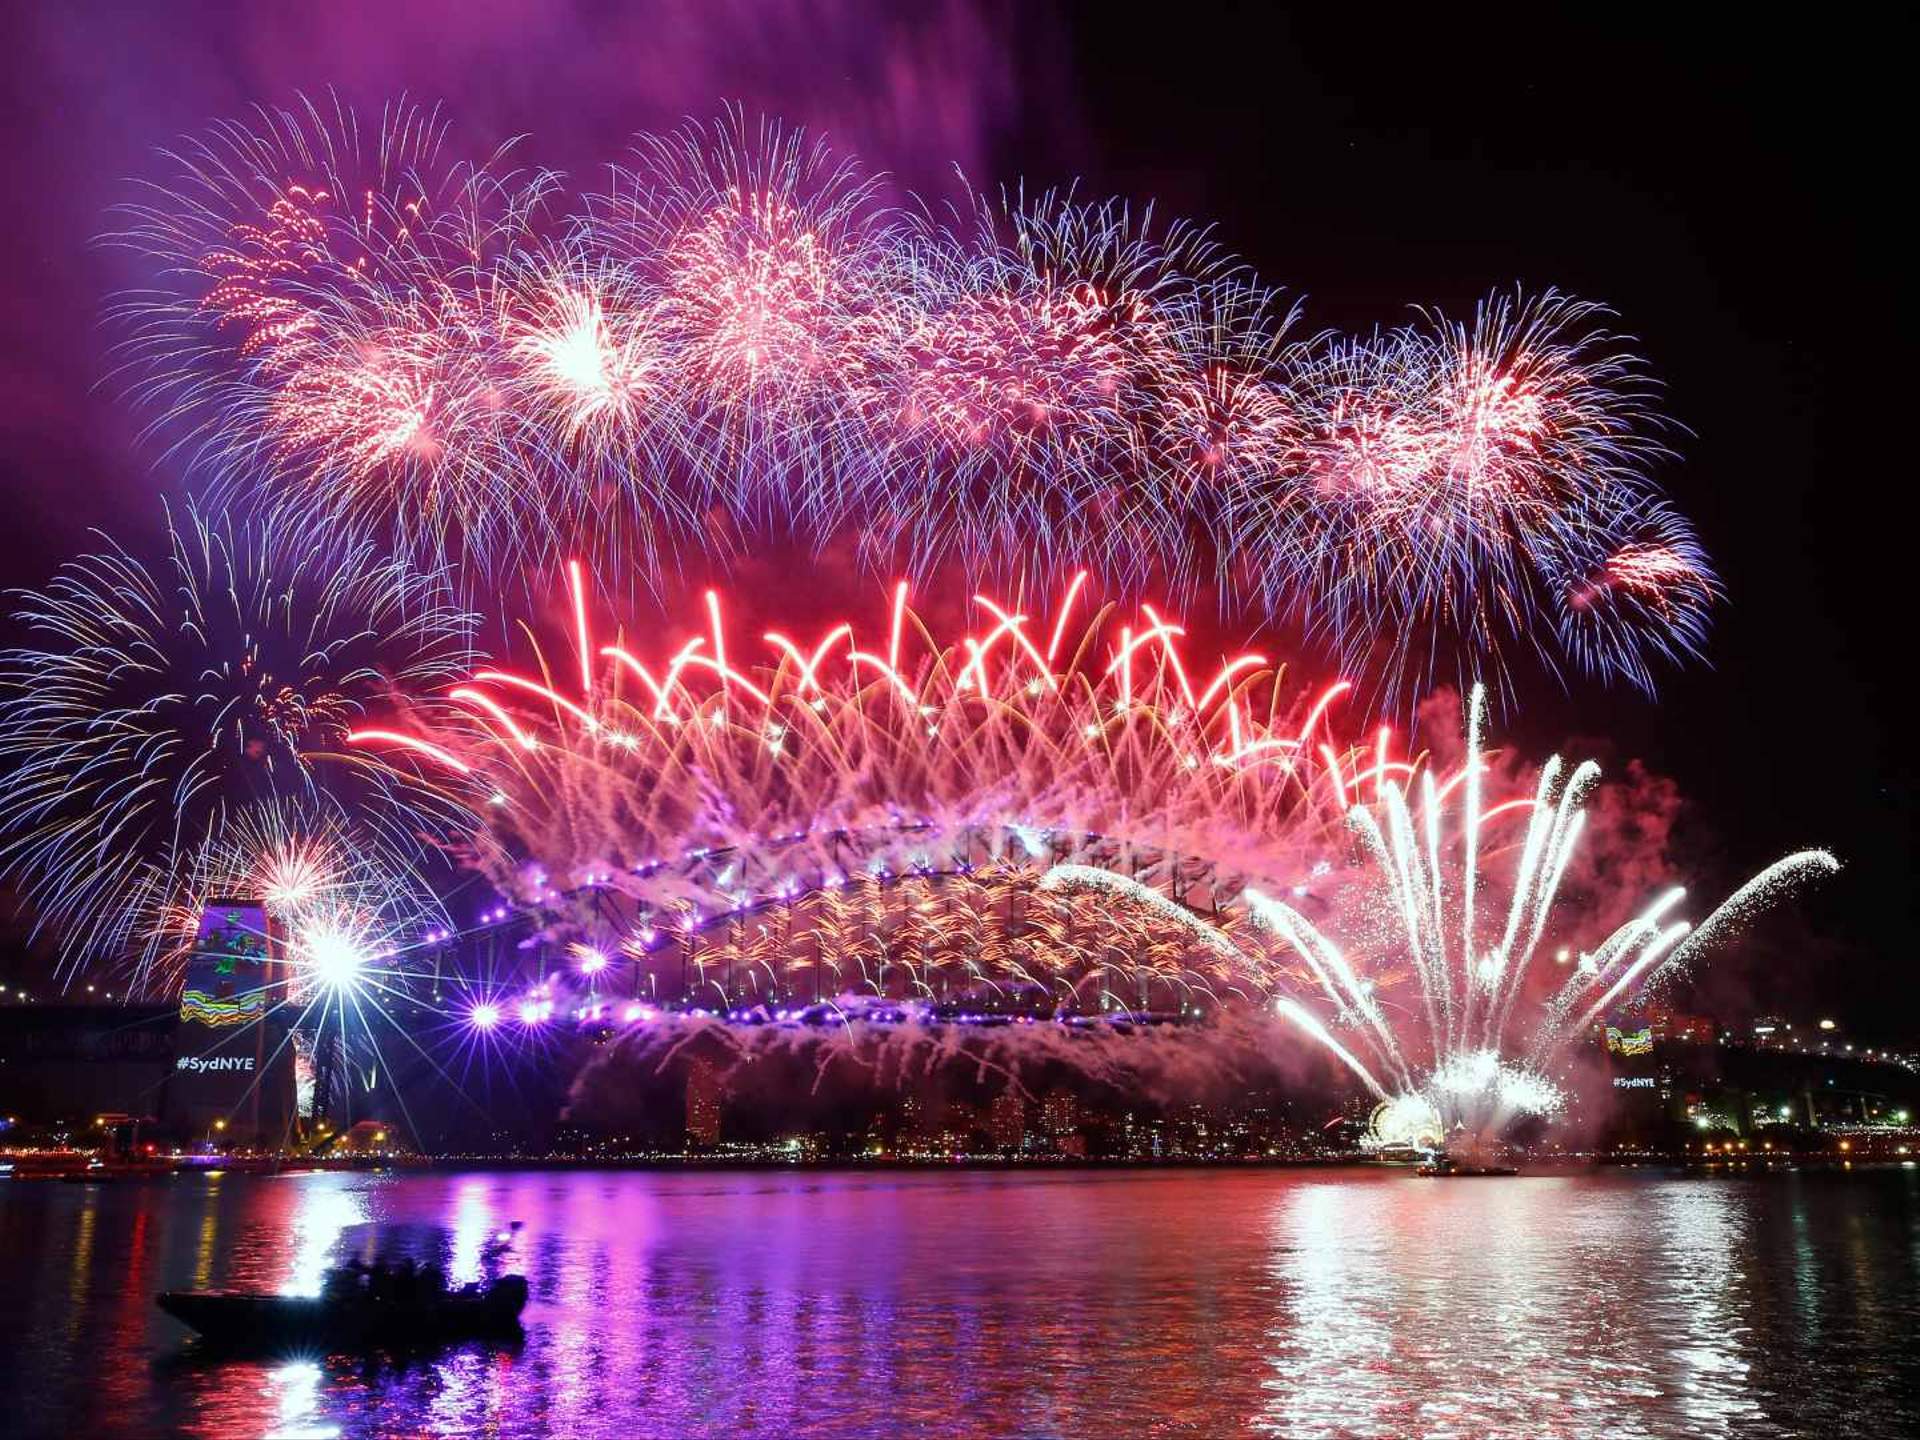 Sydney S 9pm New Year S Eve Fireworks Have Been Cancelled For The Second Year In A Row Concrete Playground